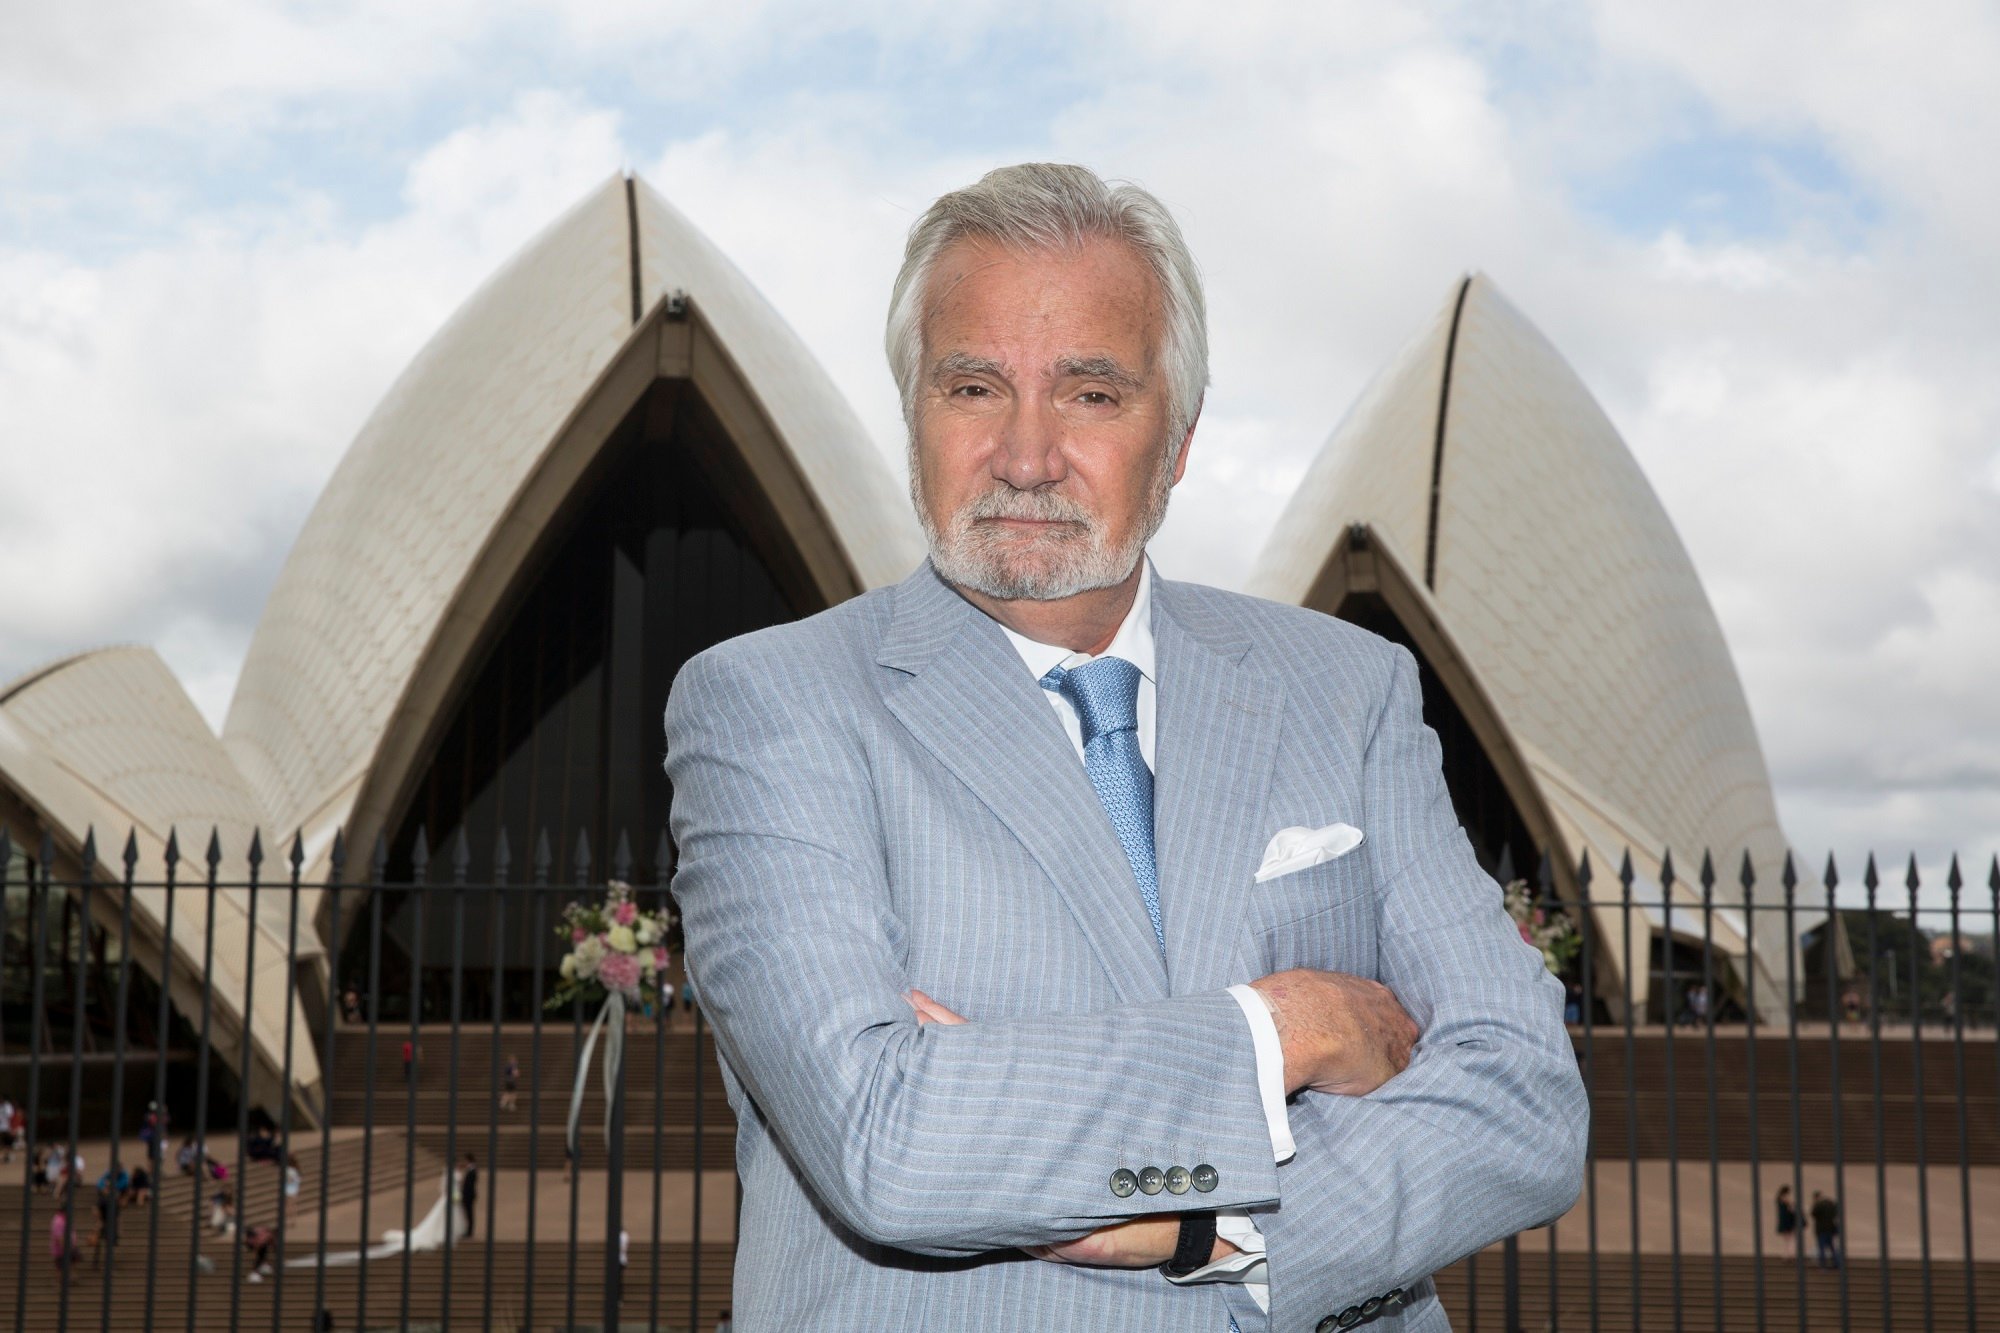 The Bold and the Beautiful speculation focuses on Eric Forrester, pictured here in a light blue tailored suit against a background featuring the Sydney Opera House